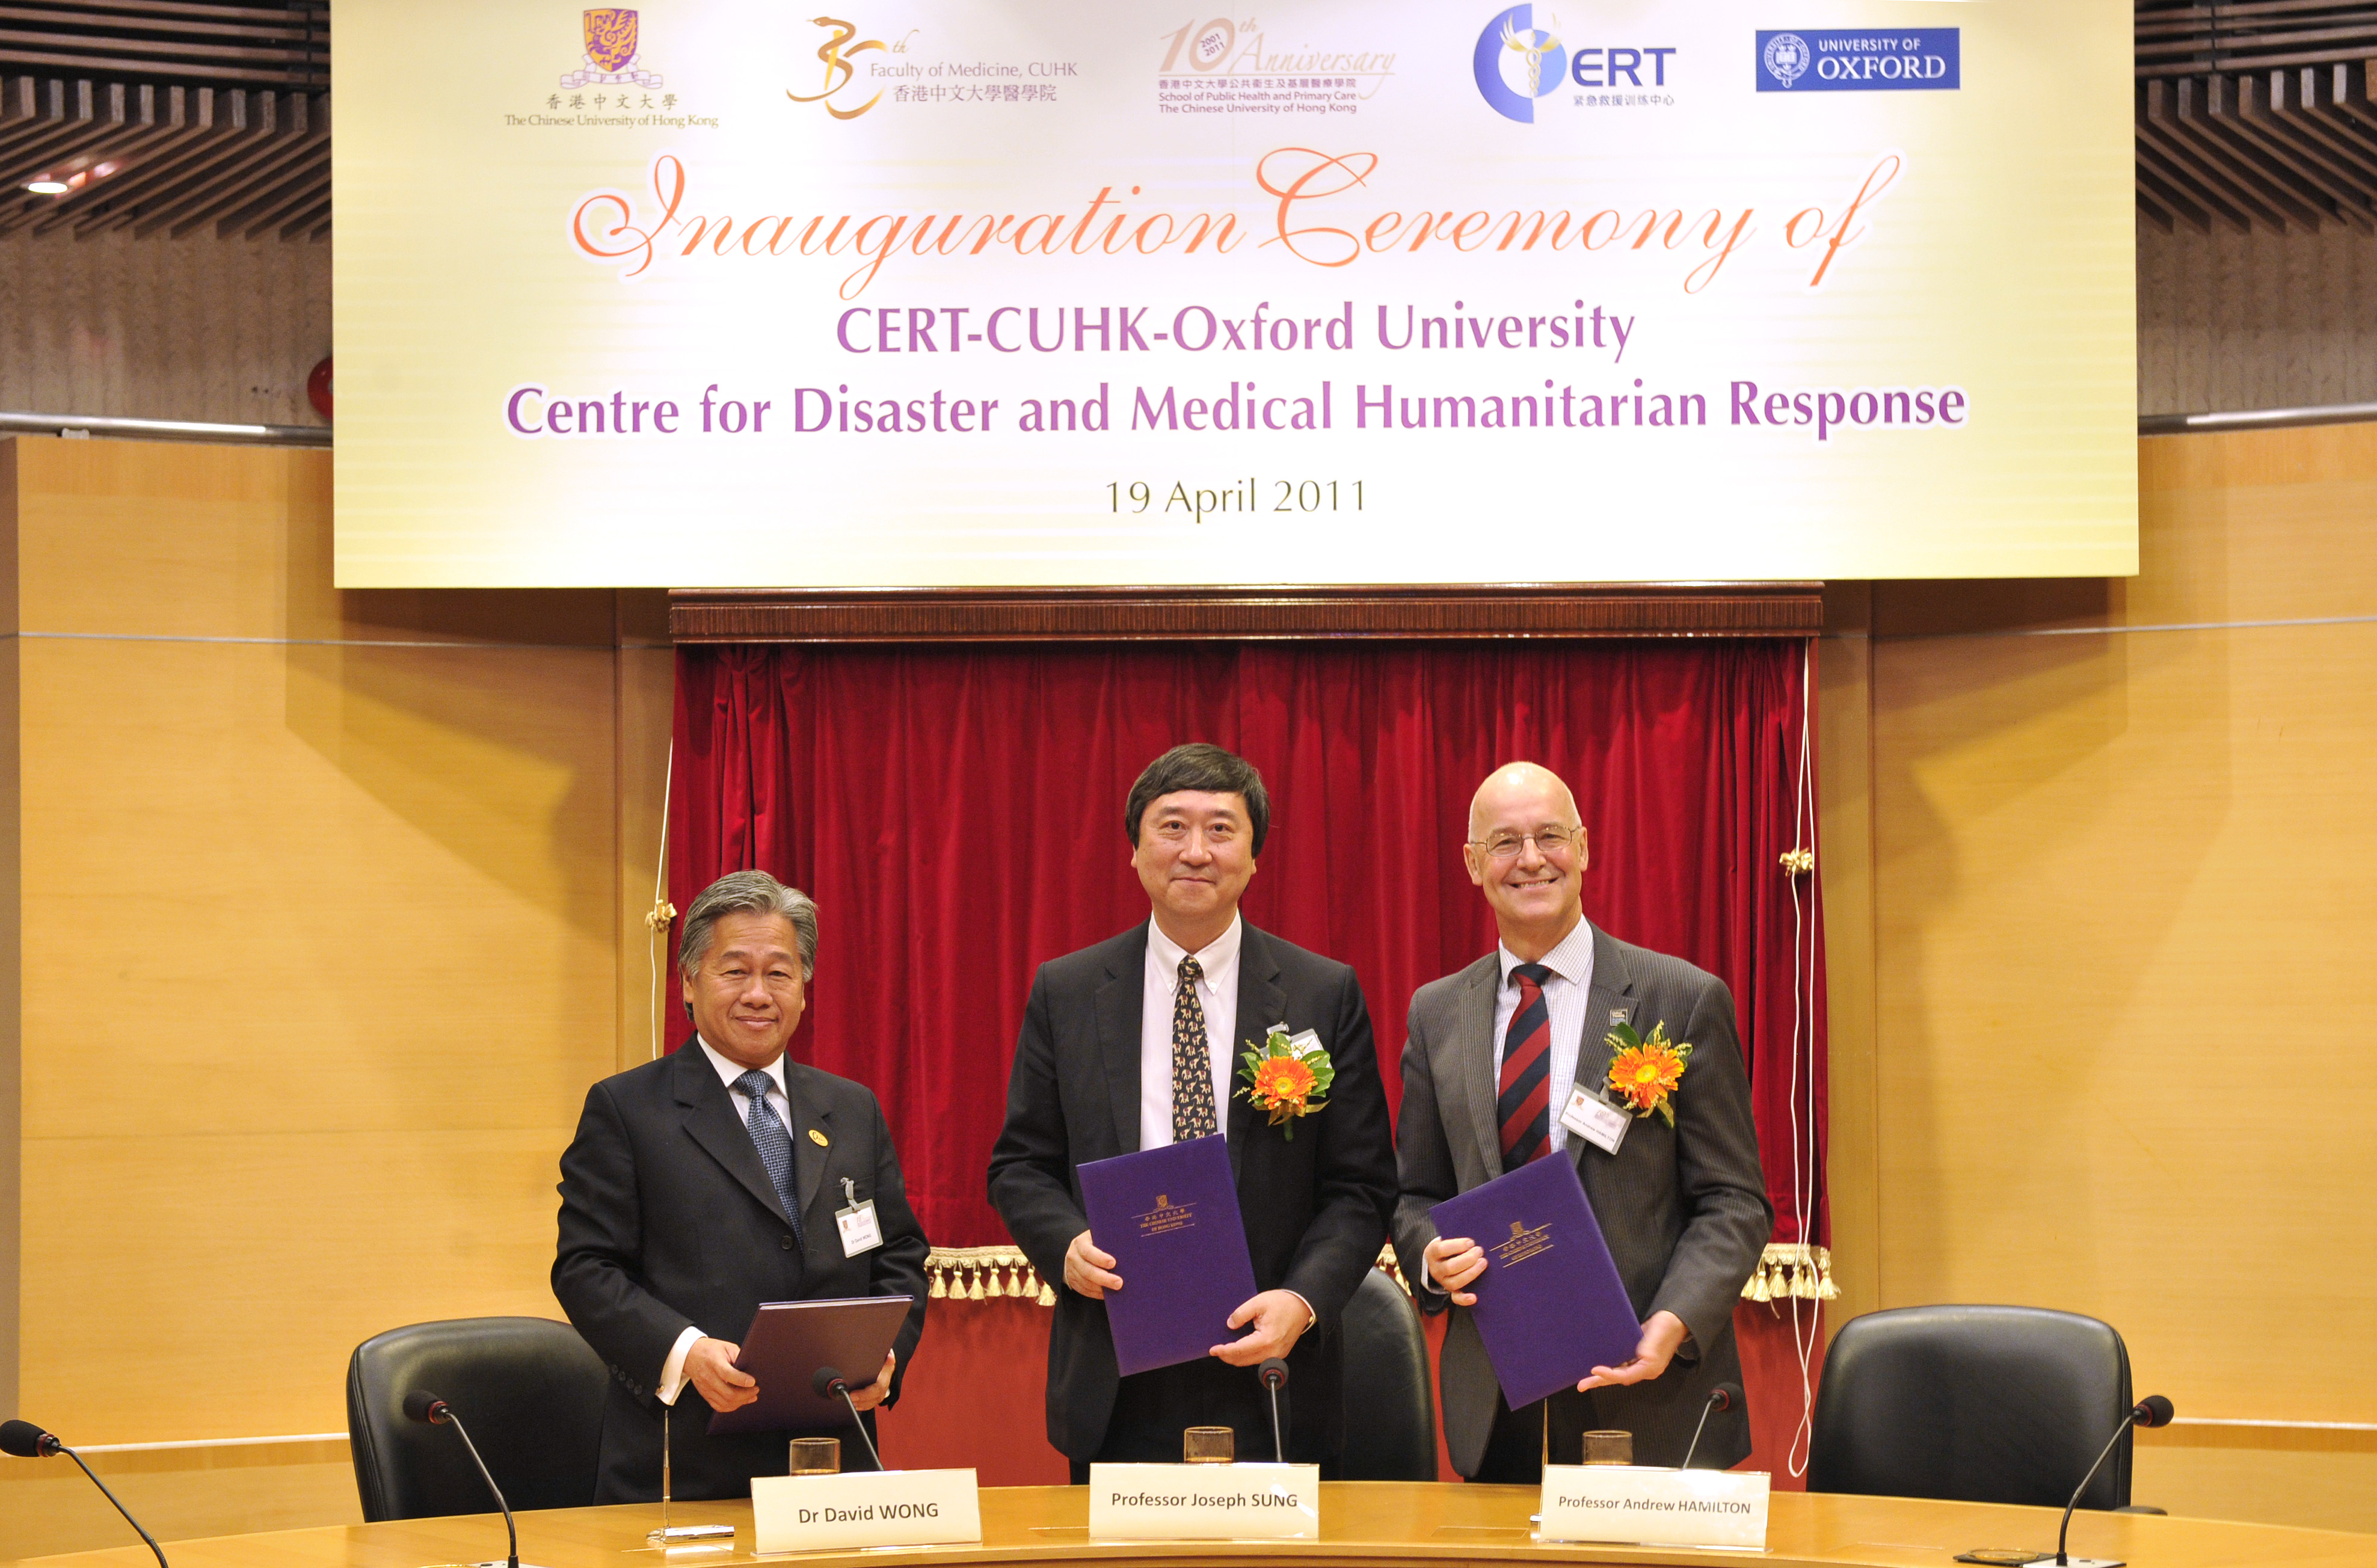 From left: Dr. David WONG, Prof. Joseph SUNG and Prof. Andrew HAMILTON sign a MOU on the establishment of CCOUC